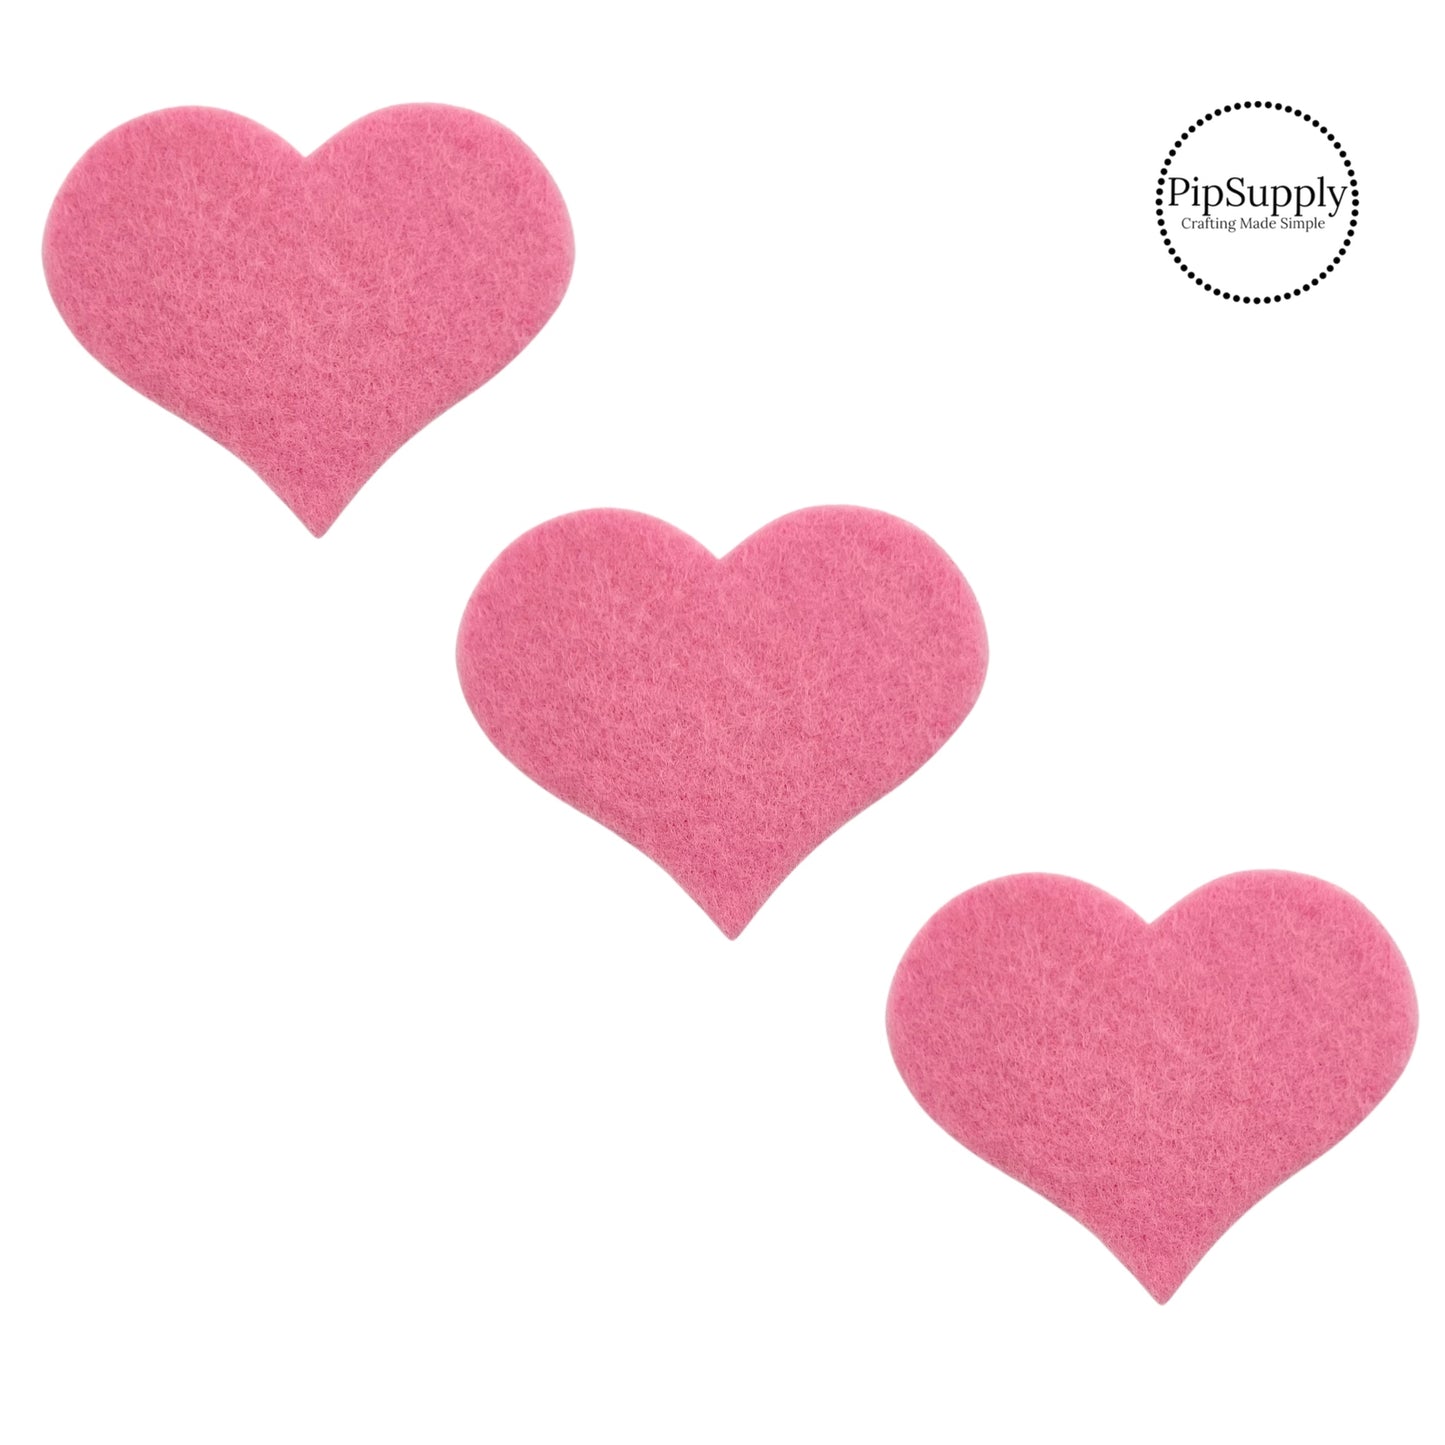 soft felt heart embellishment in light pink measuring about two inches tall and two and a half inches wide